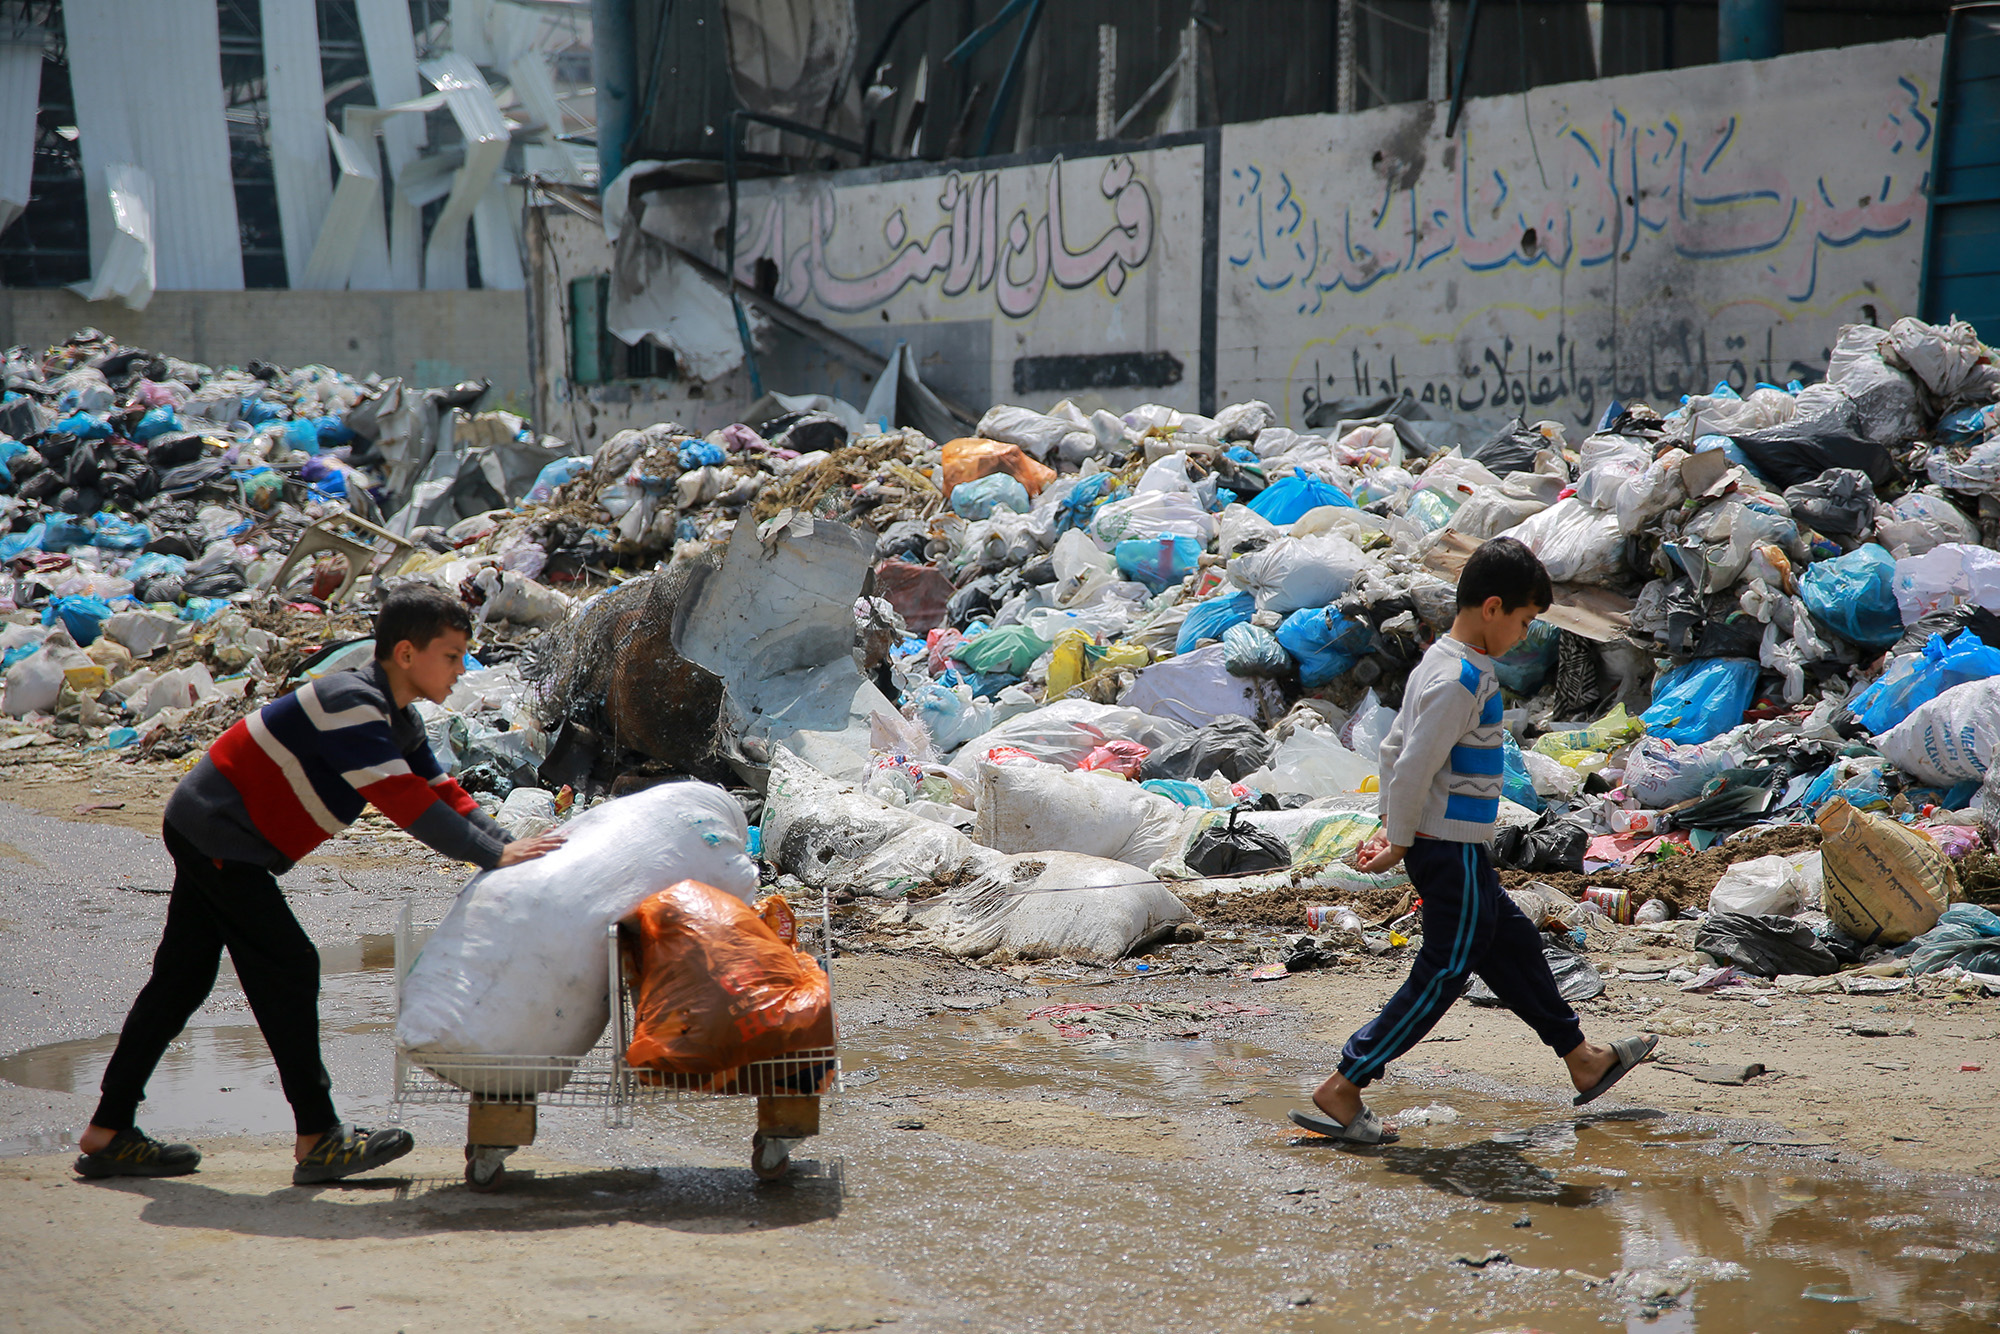 Children walk past a pile of household refuse in a street in Gaza on March 28.